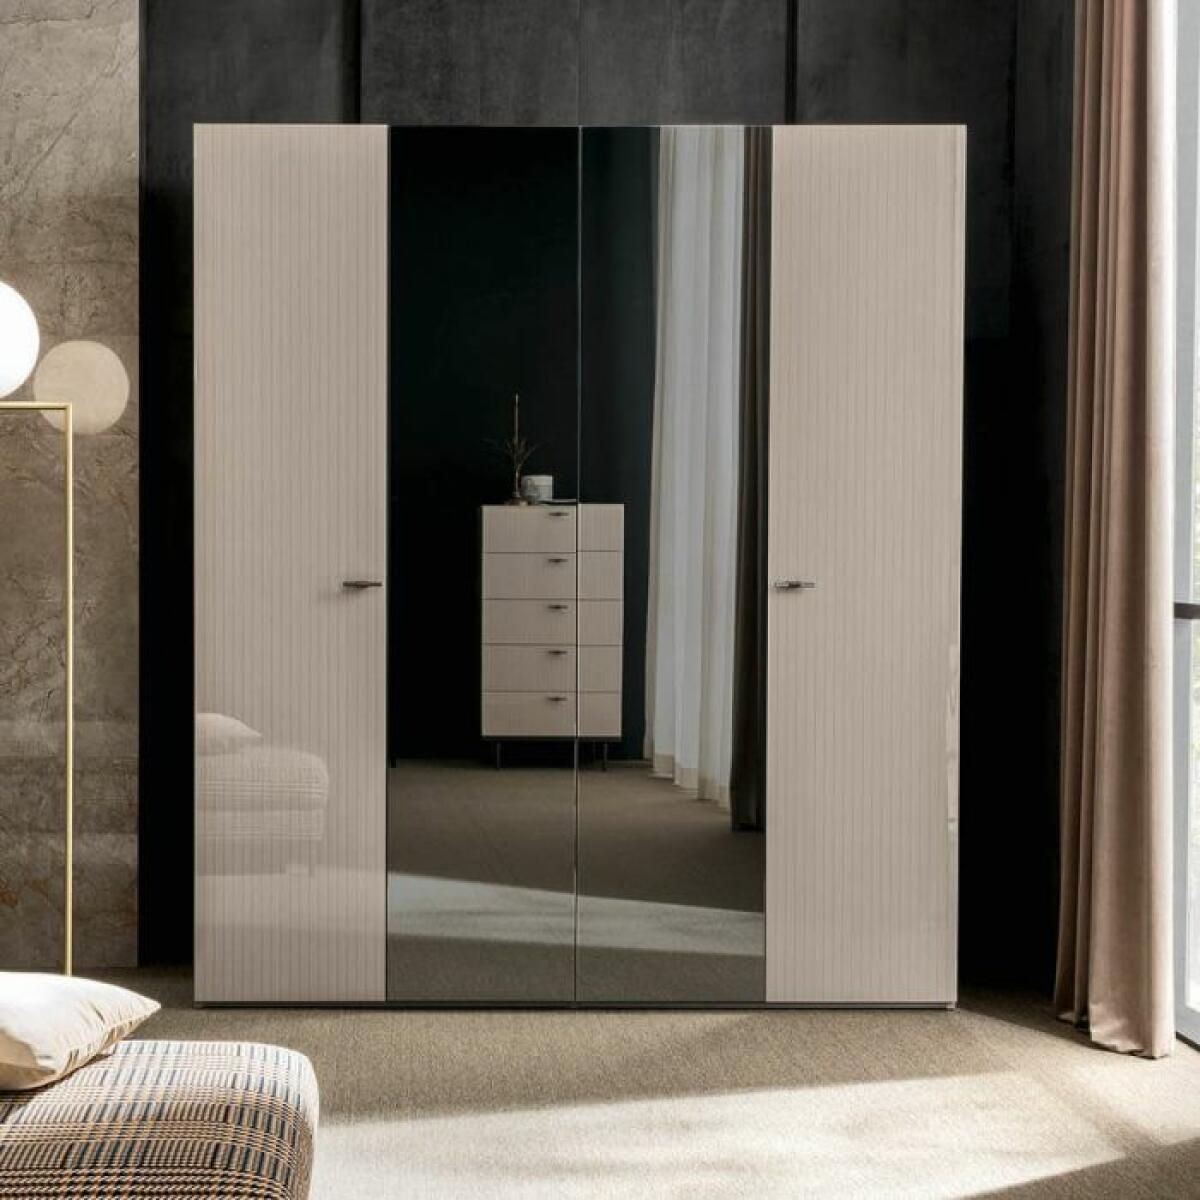 Claire 4 Door High Gloss Mirror Wardrobe – Bova Contemporary Furniture –  Dallas, Texas Modern Furniture Store Intended For Wardrobes 4 Doors (View 15 of 15)